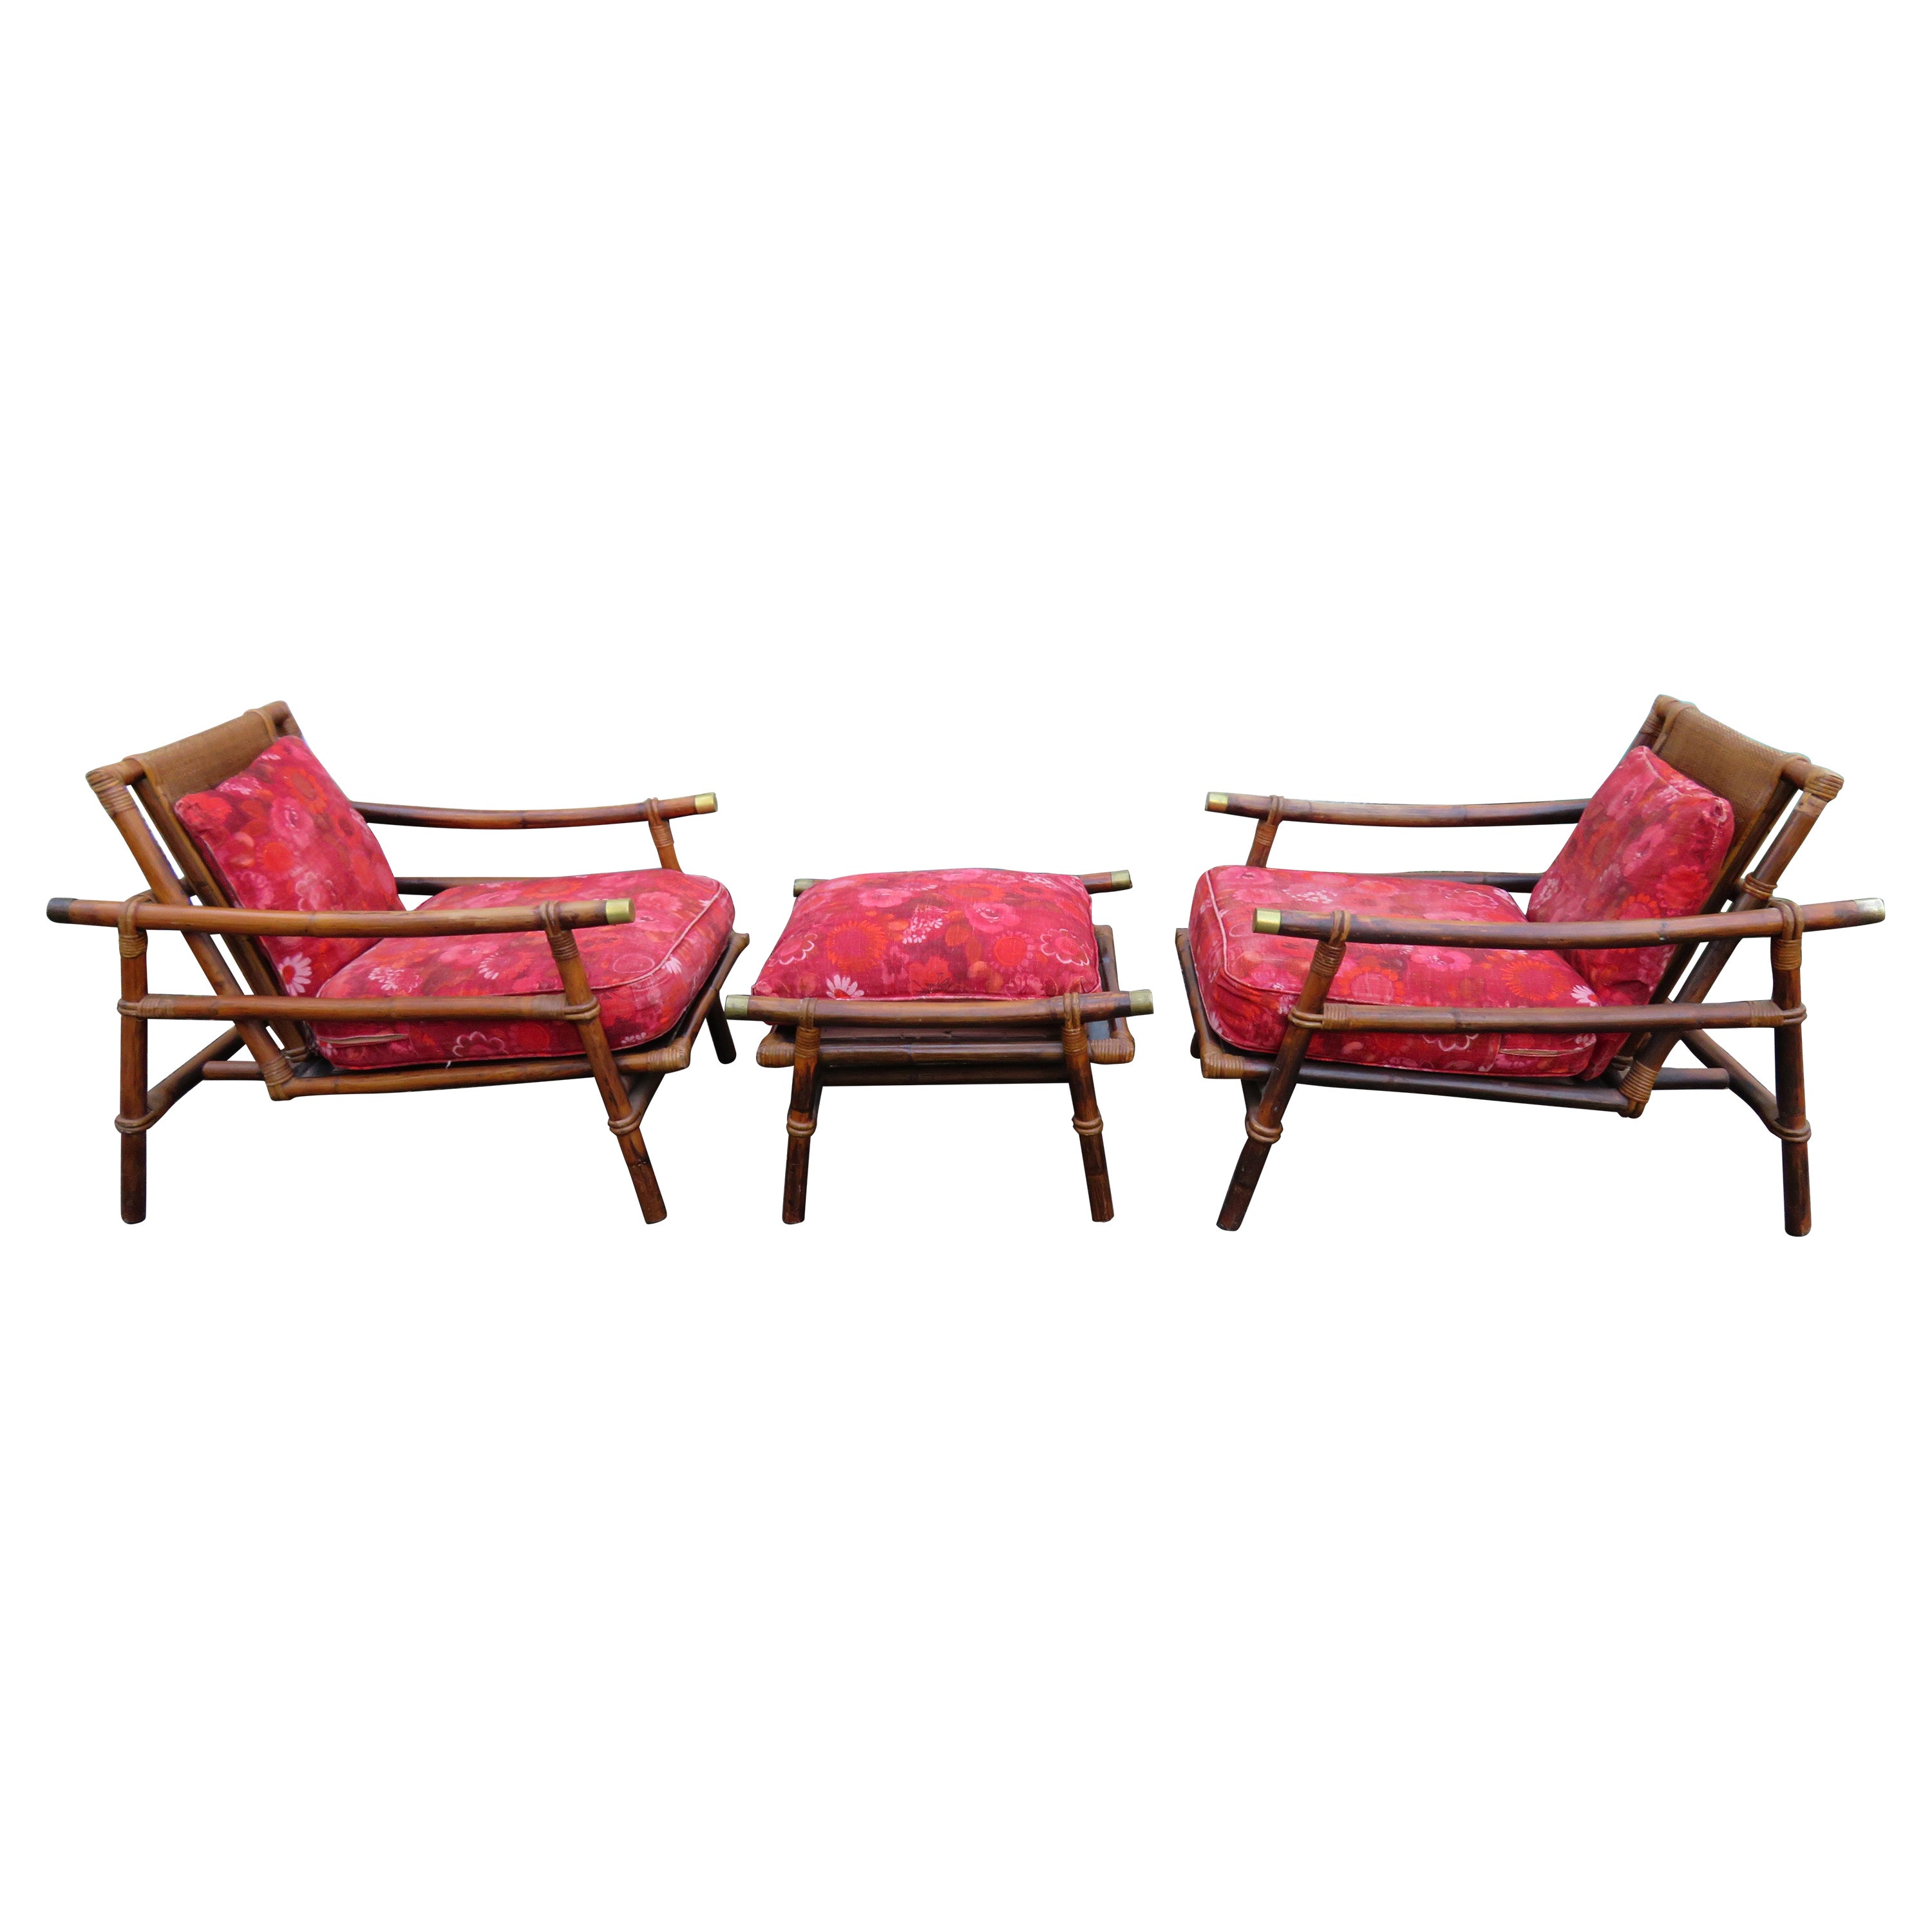 Pair of Ficks Reed Rattan Lounge Club Chair Ottoman, John Wisner Campaign Style